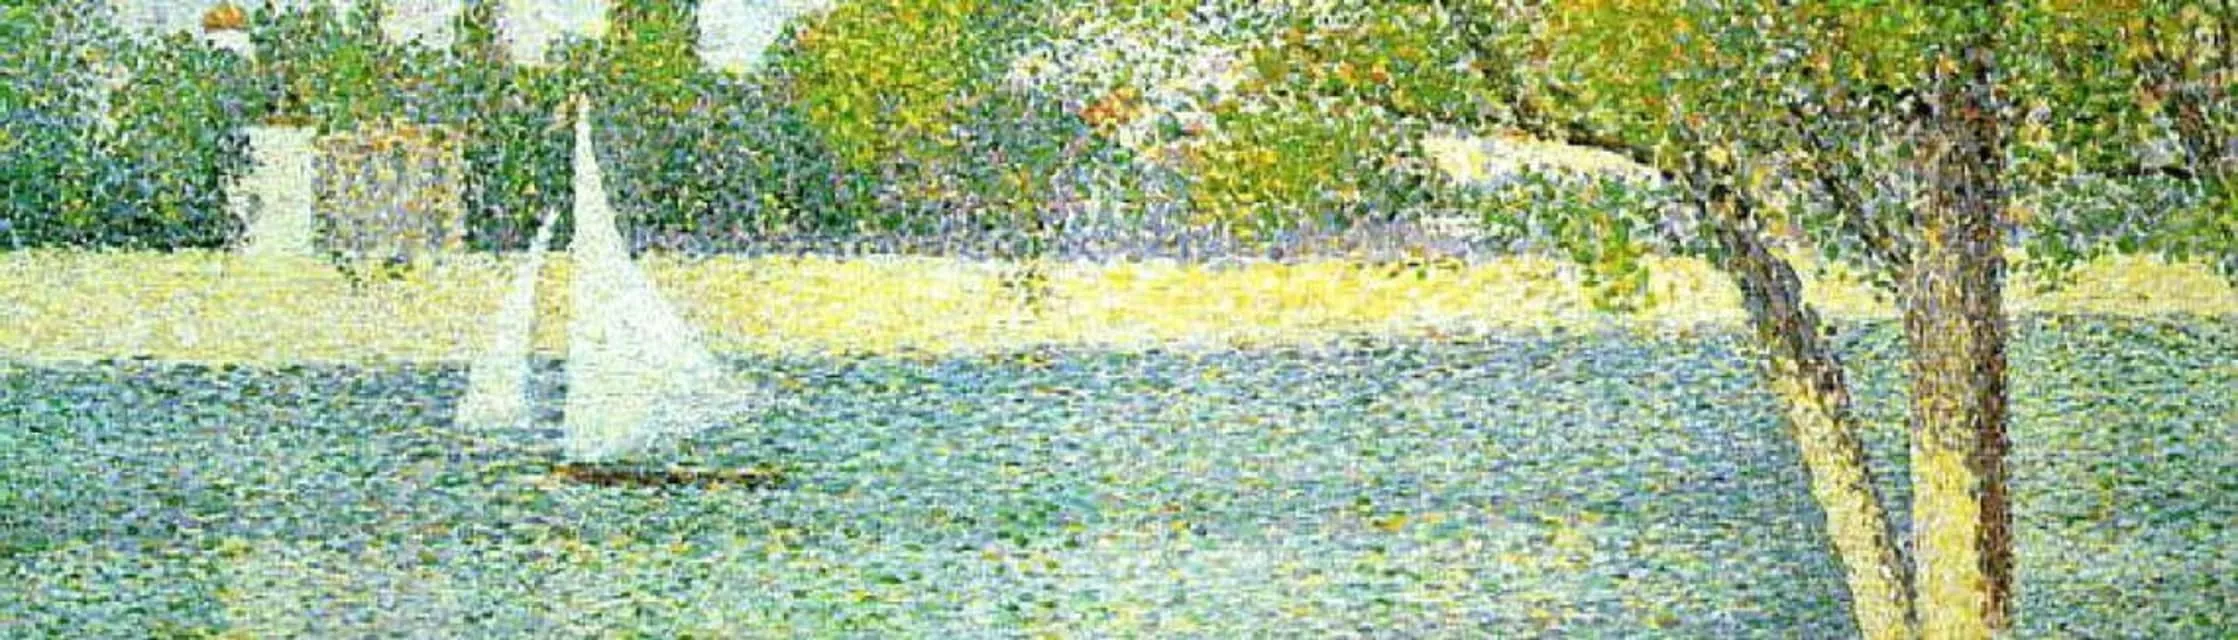 Georges Seurat - French artist